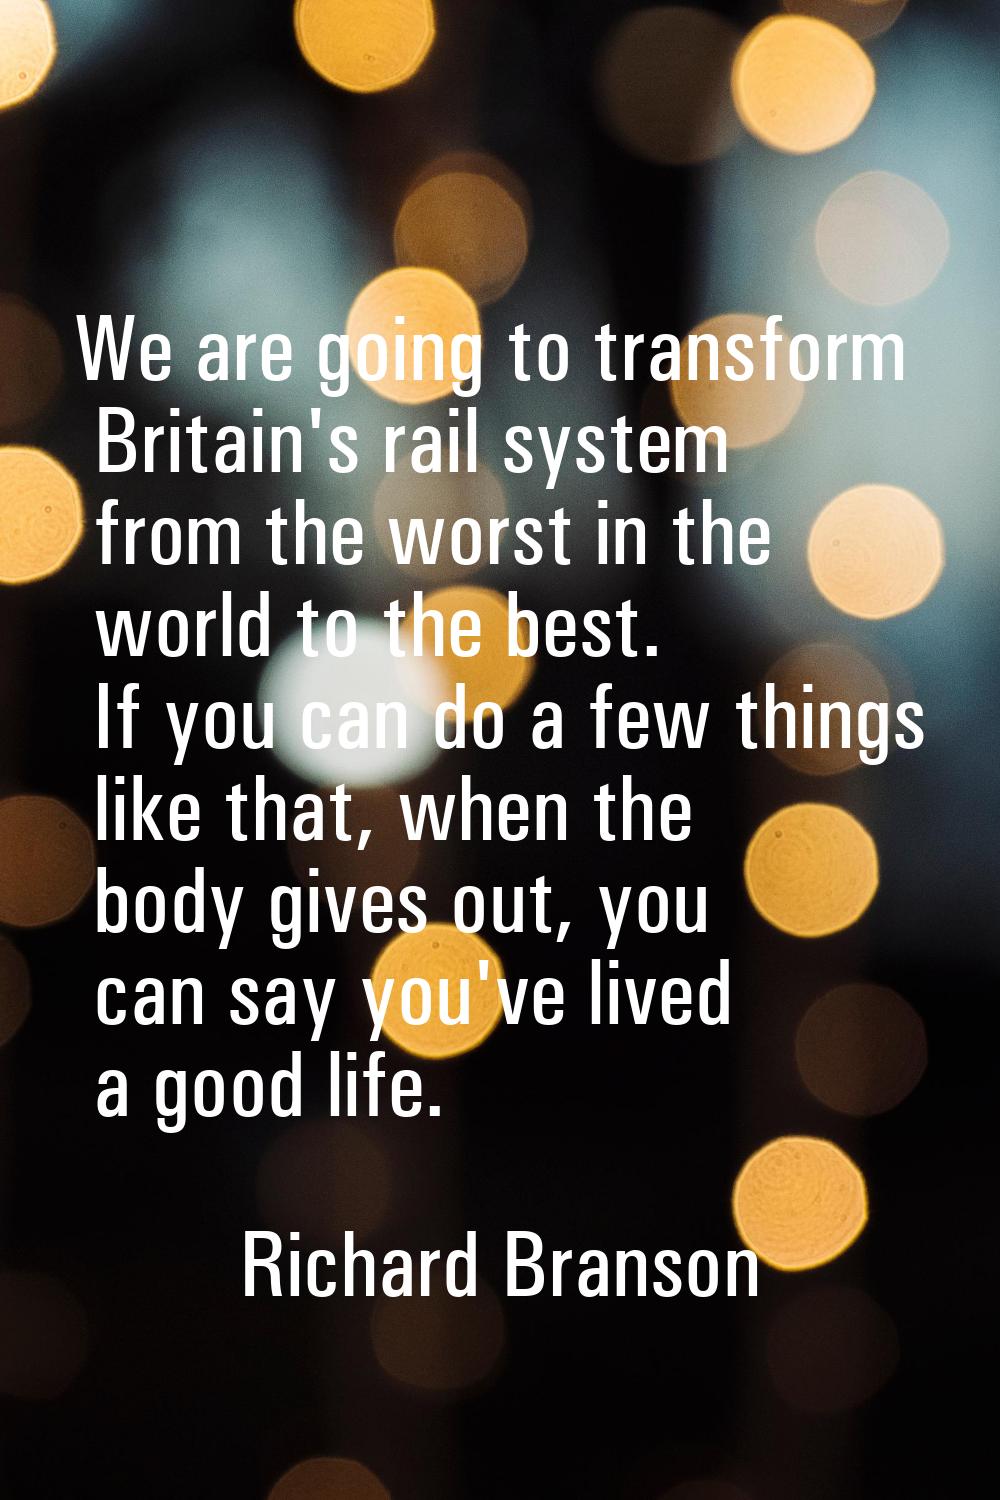 We are going to transform Britain's rail system from the worst in the world to the best. If you can